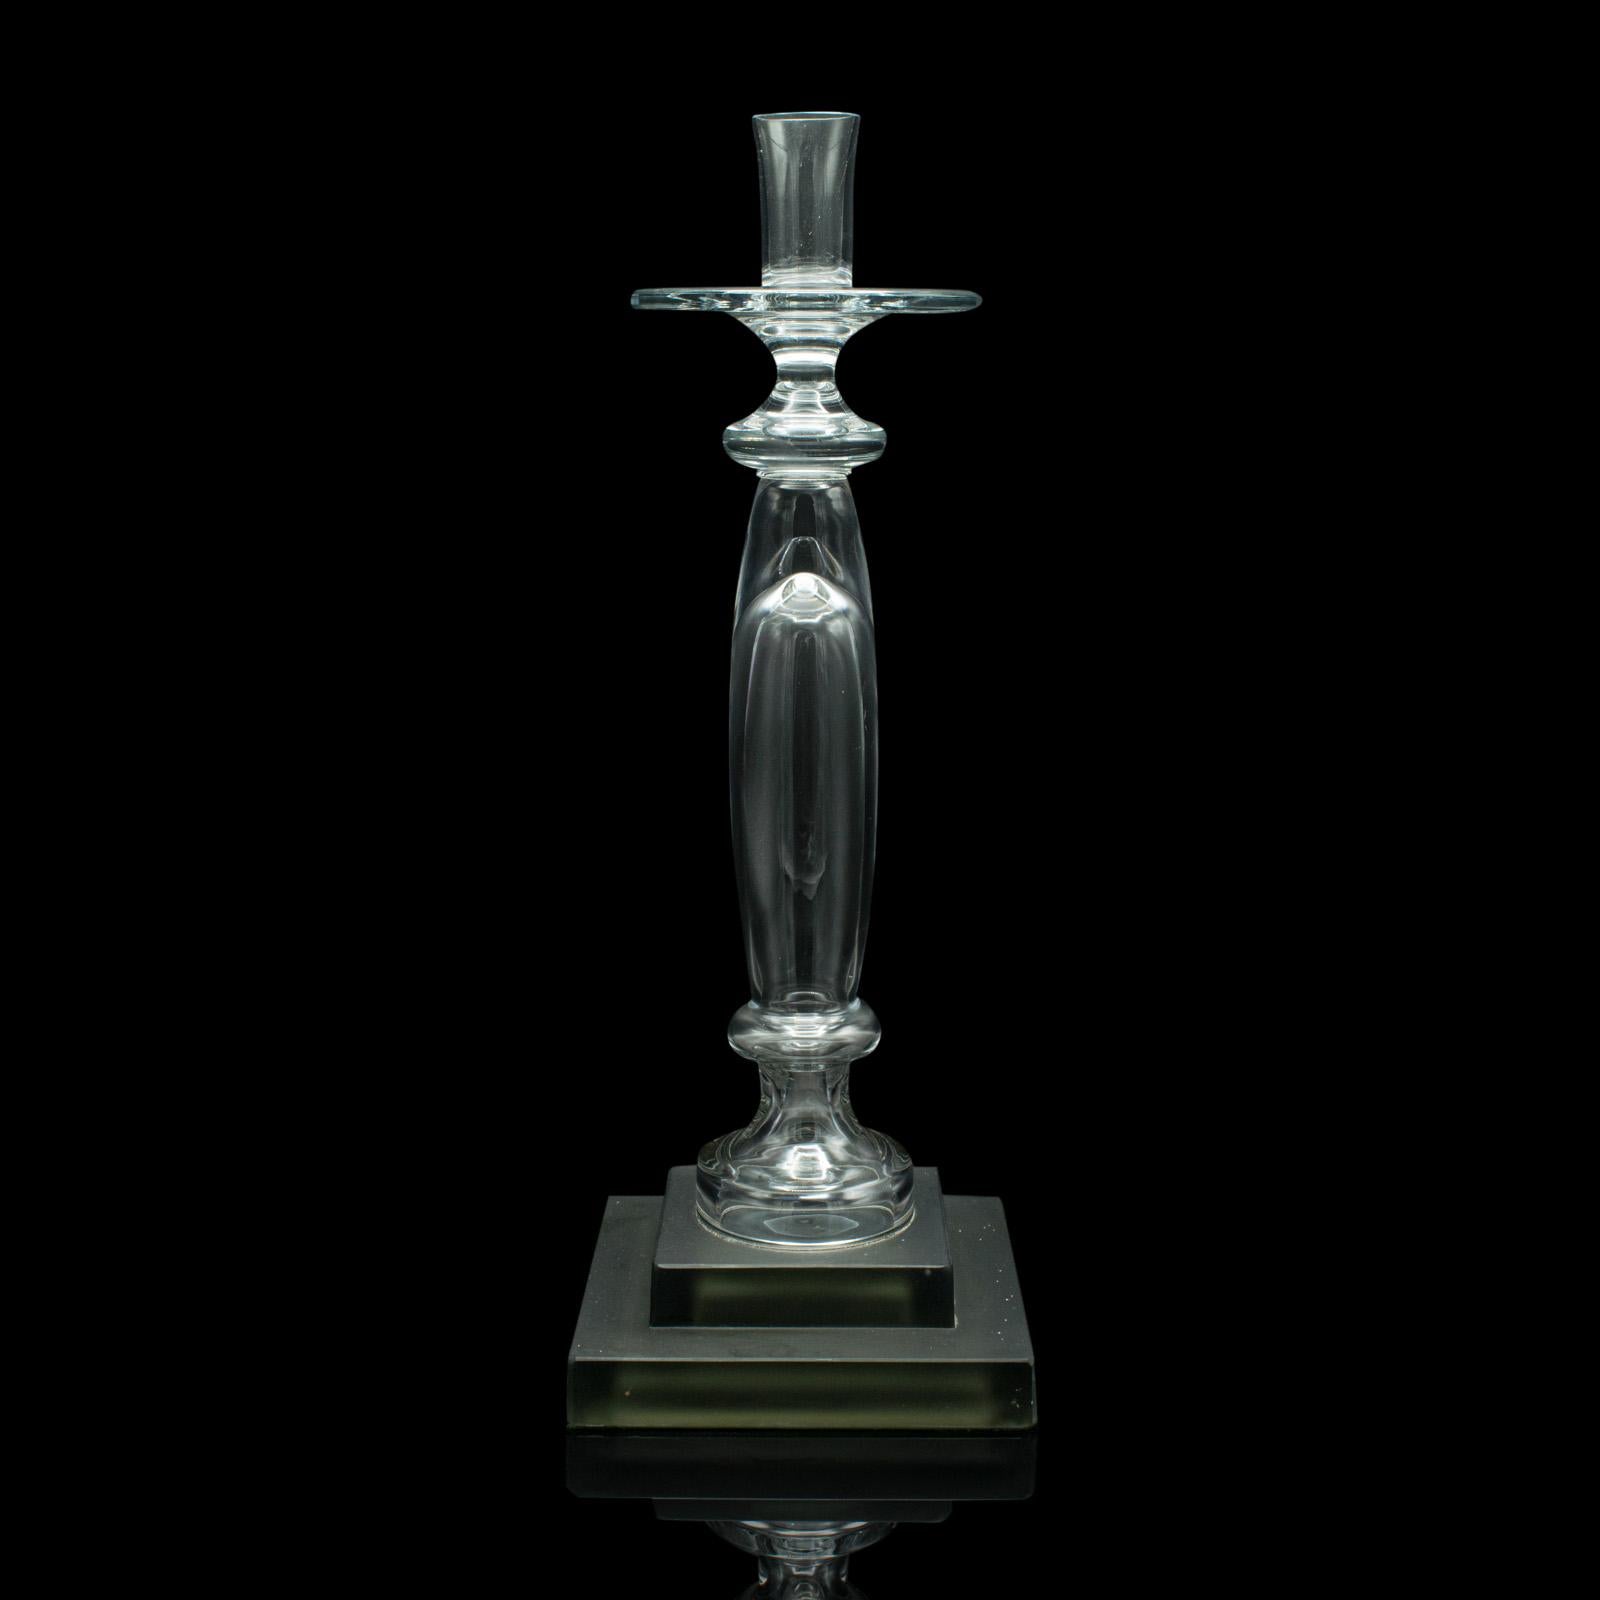 Vintage Centrepiece Candlestick, Italian Glass, Candle Nozzle, Late 20th Century In Good Condition For Sale In Hele, Devon, GB